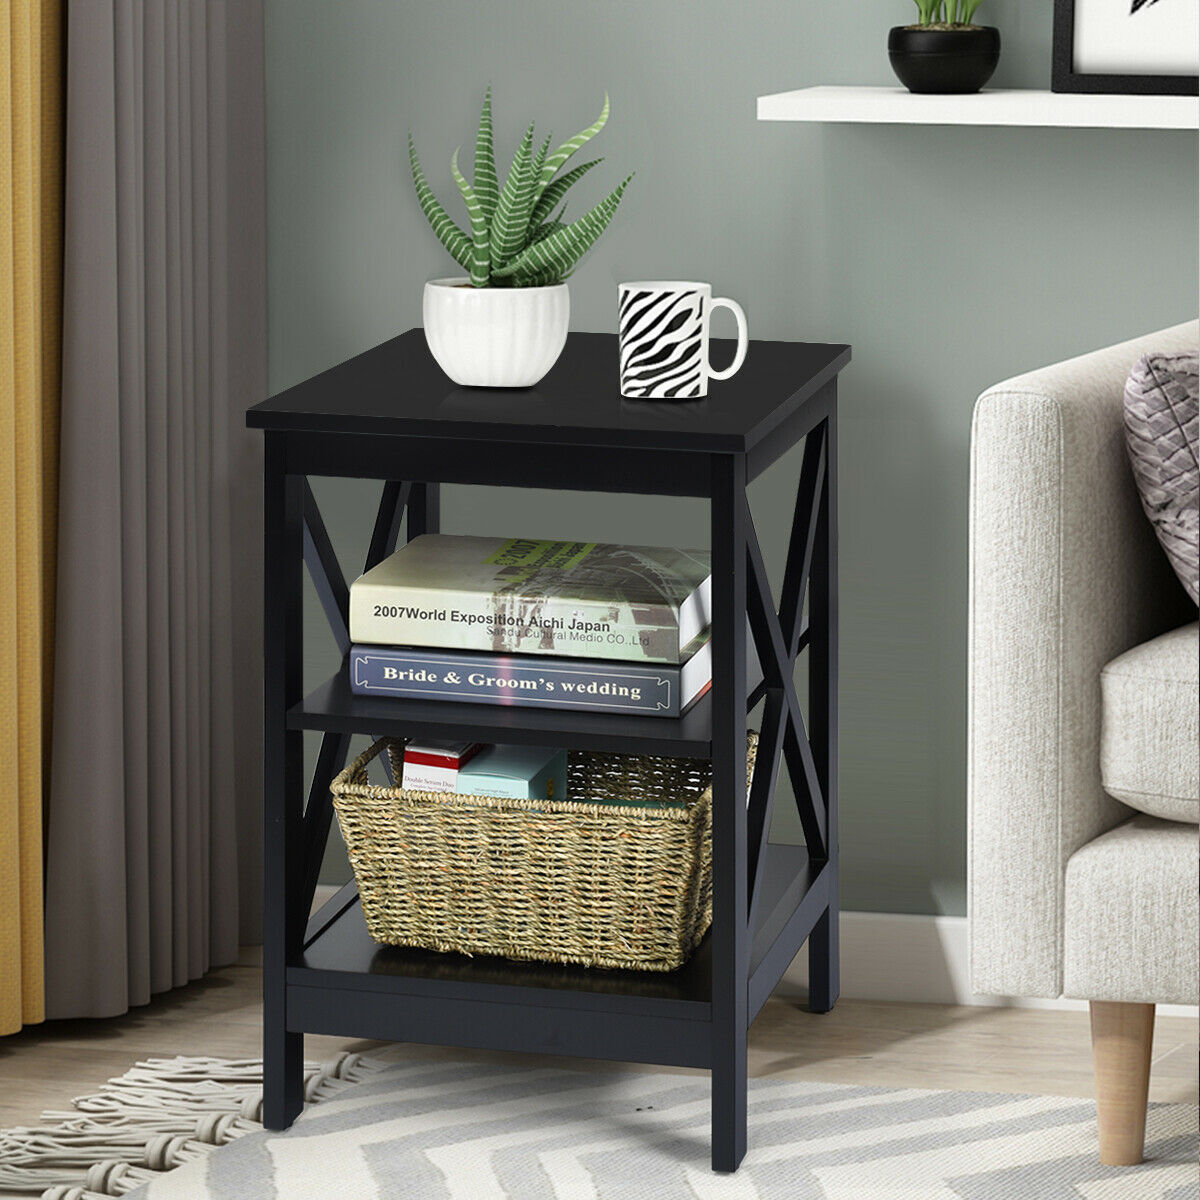 3-Tier Wooden Bedside Table Nightstand Storage Cabinets-Black